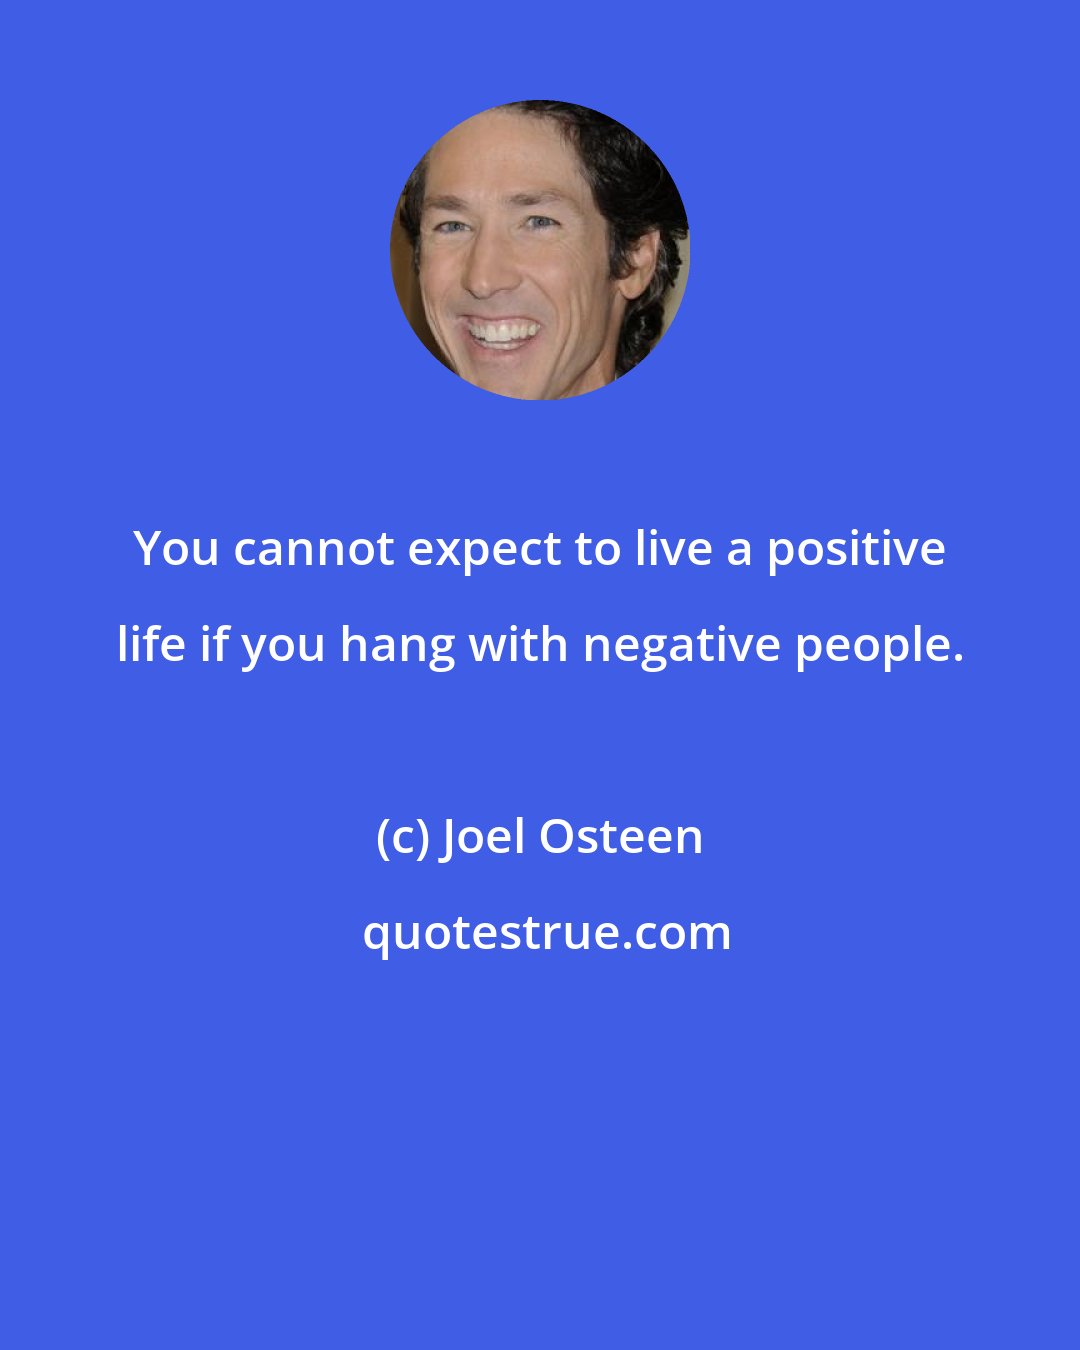 Joel Osteen: You cannot expect to live a positive life if you hang with negative people.